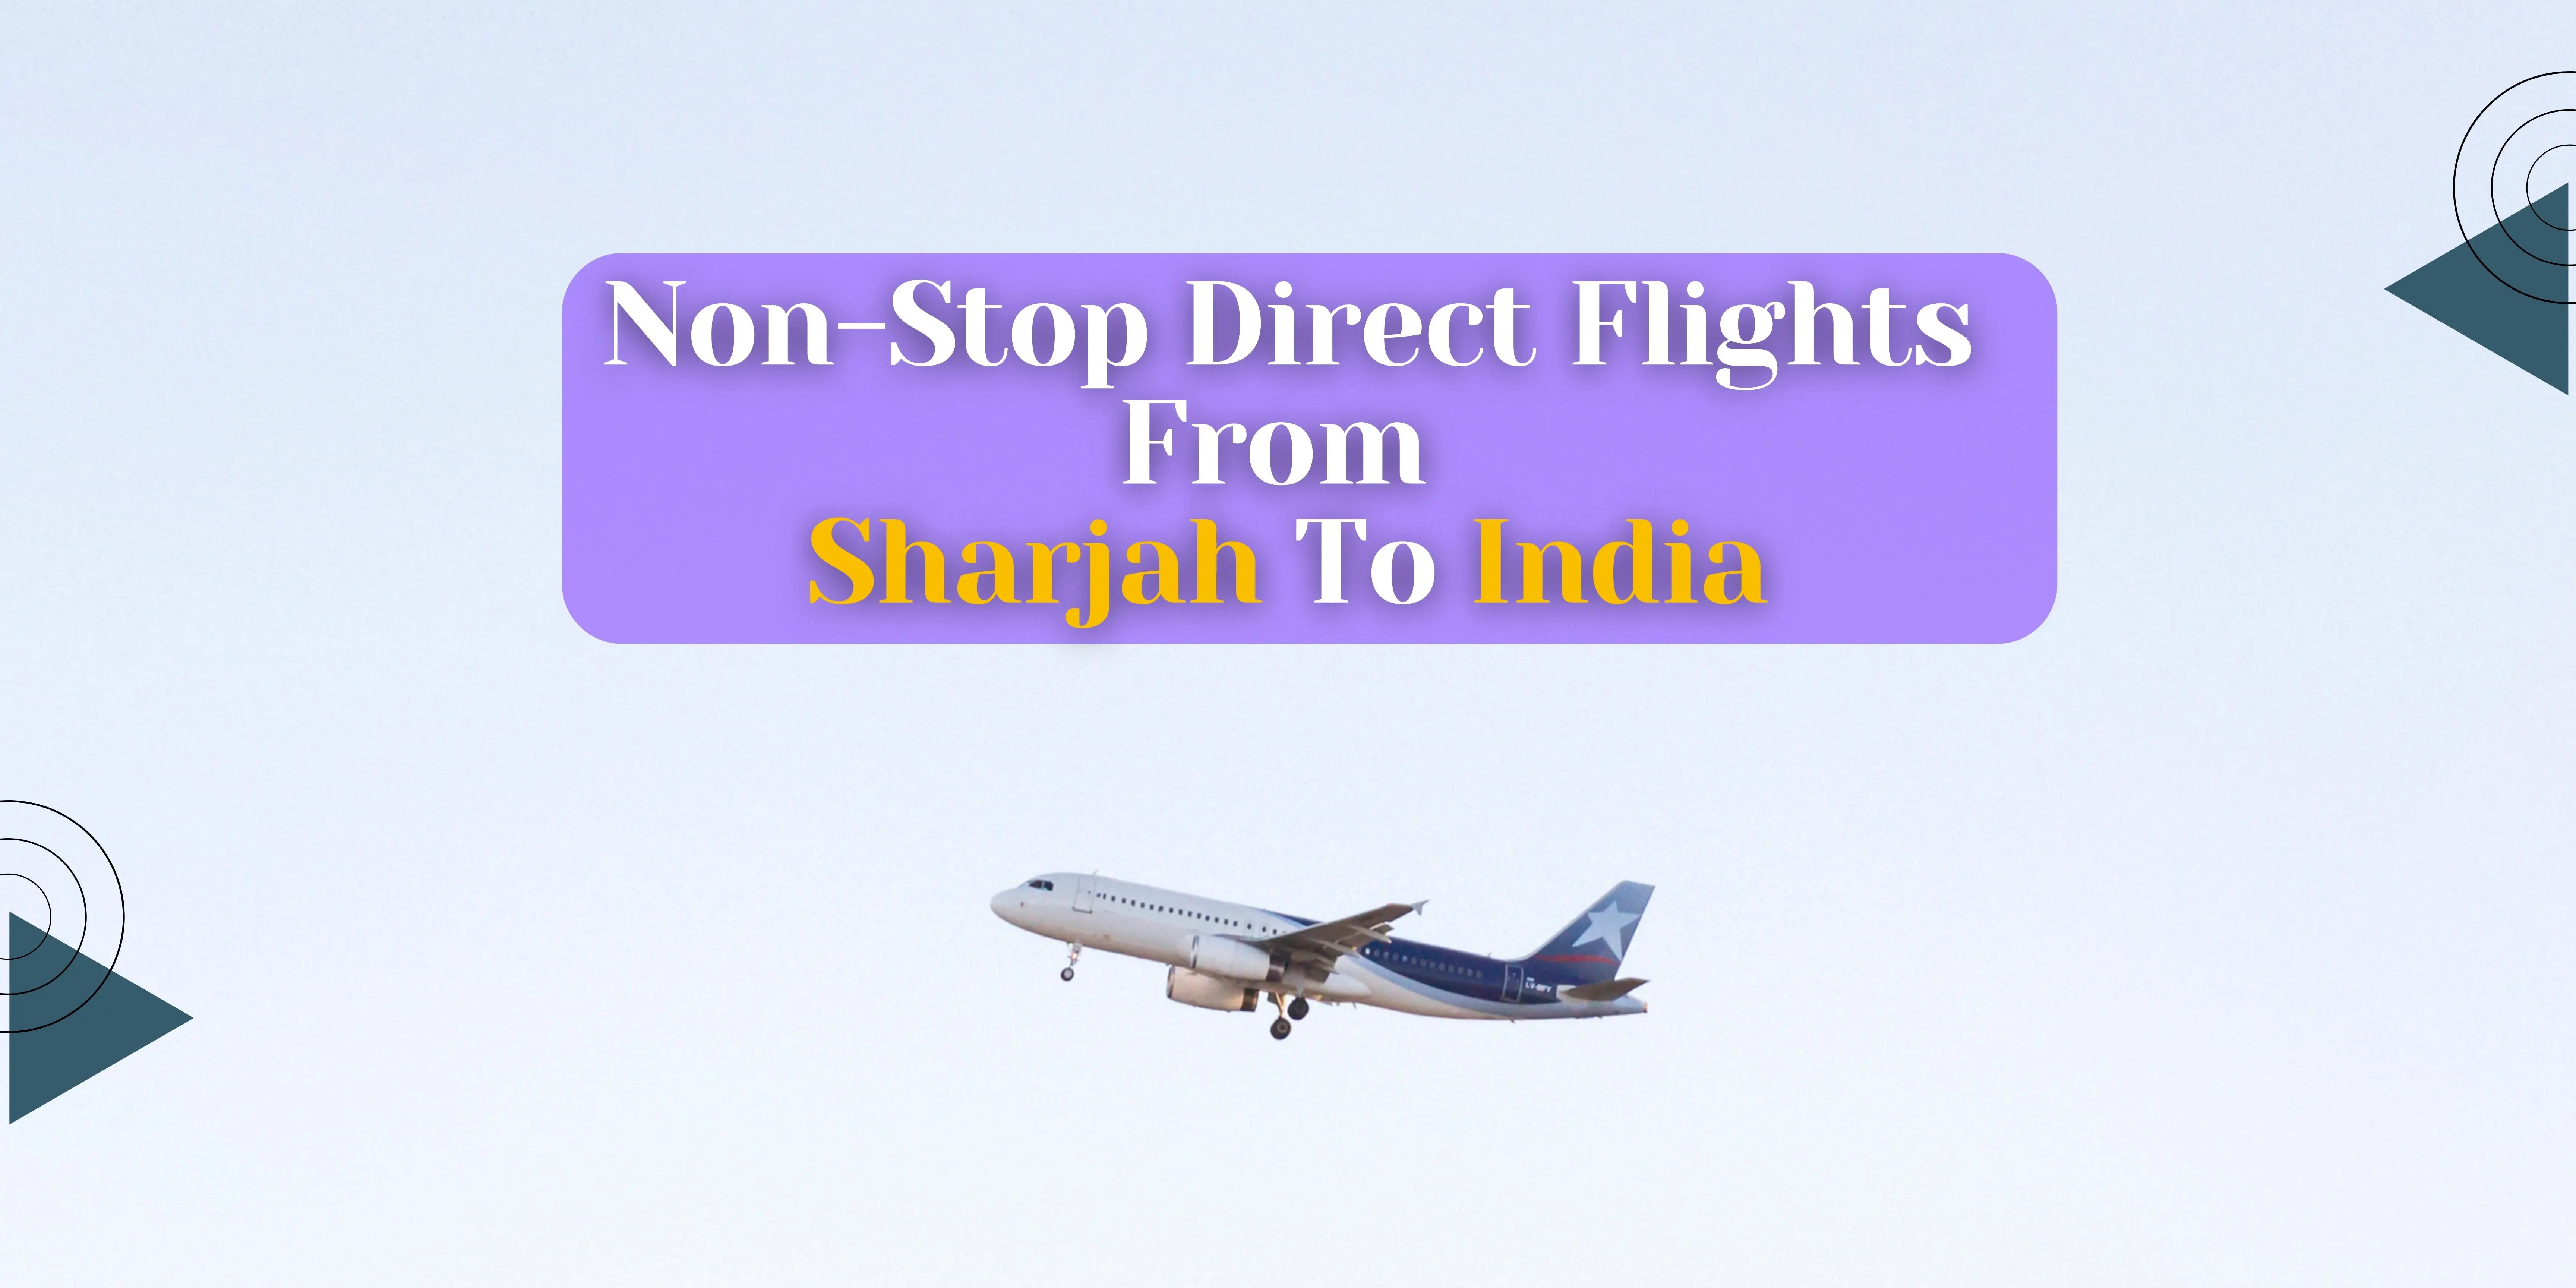 Non-Stop Direct Flights From Sharjah To India